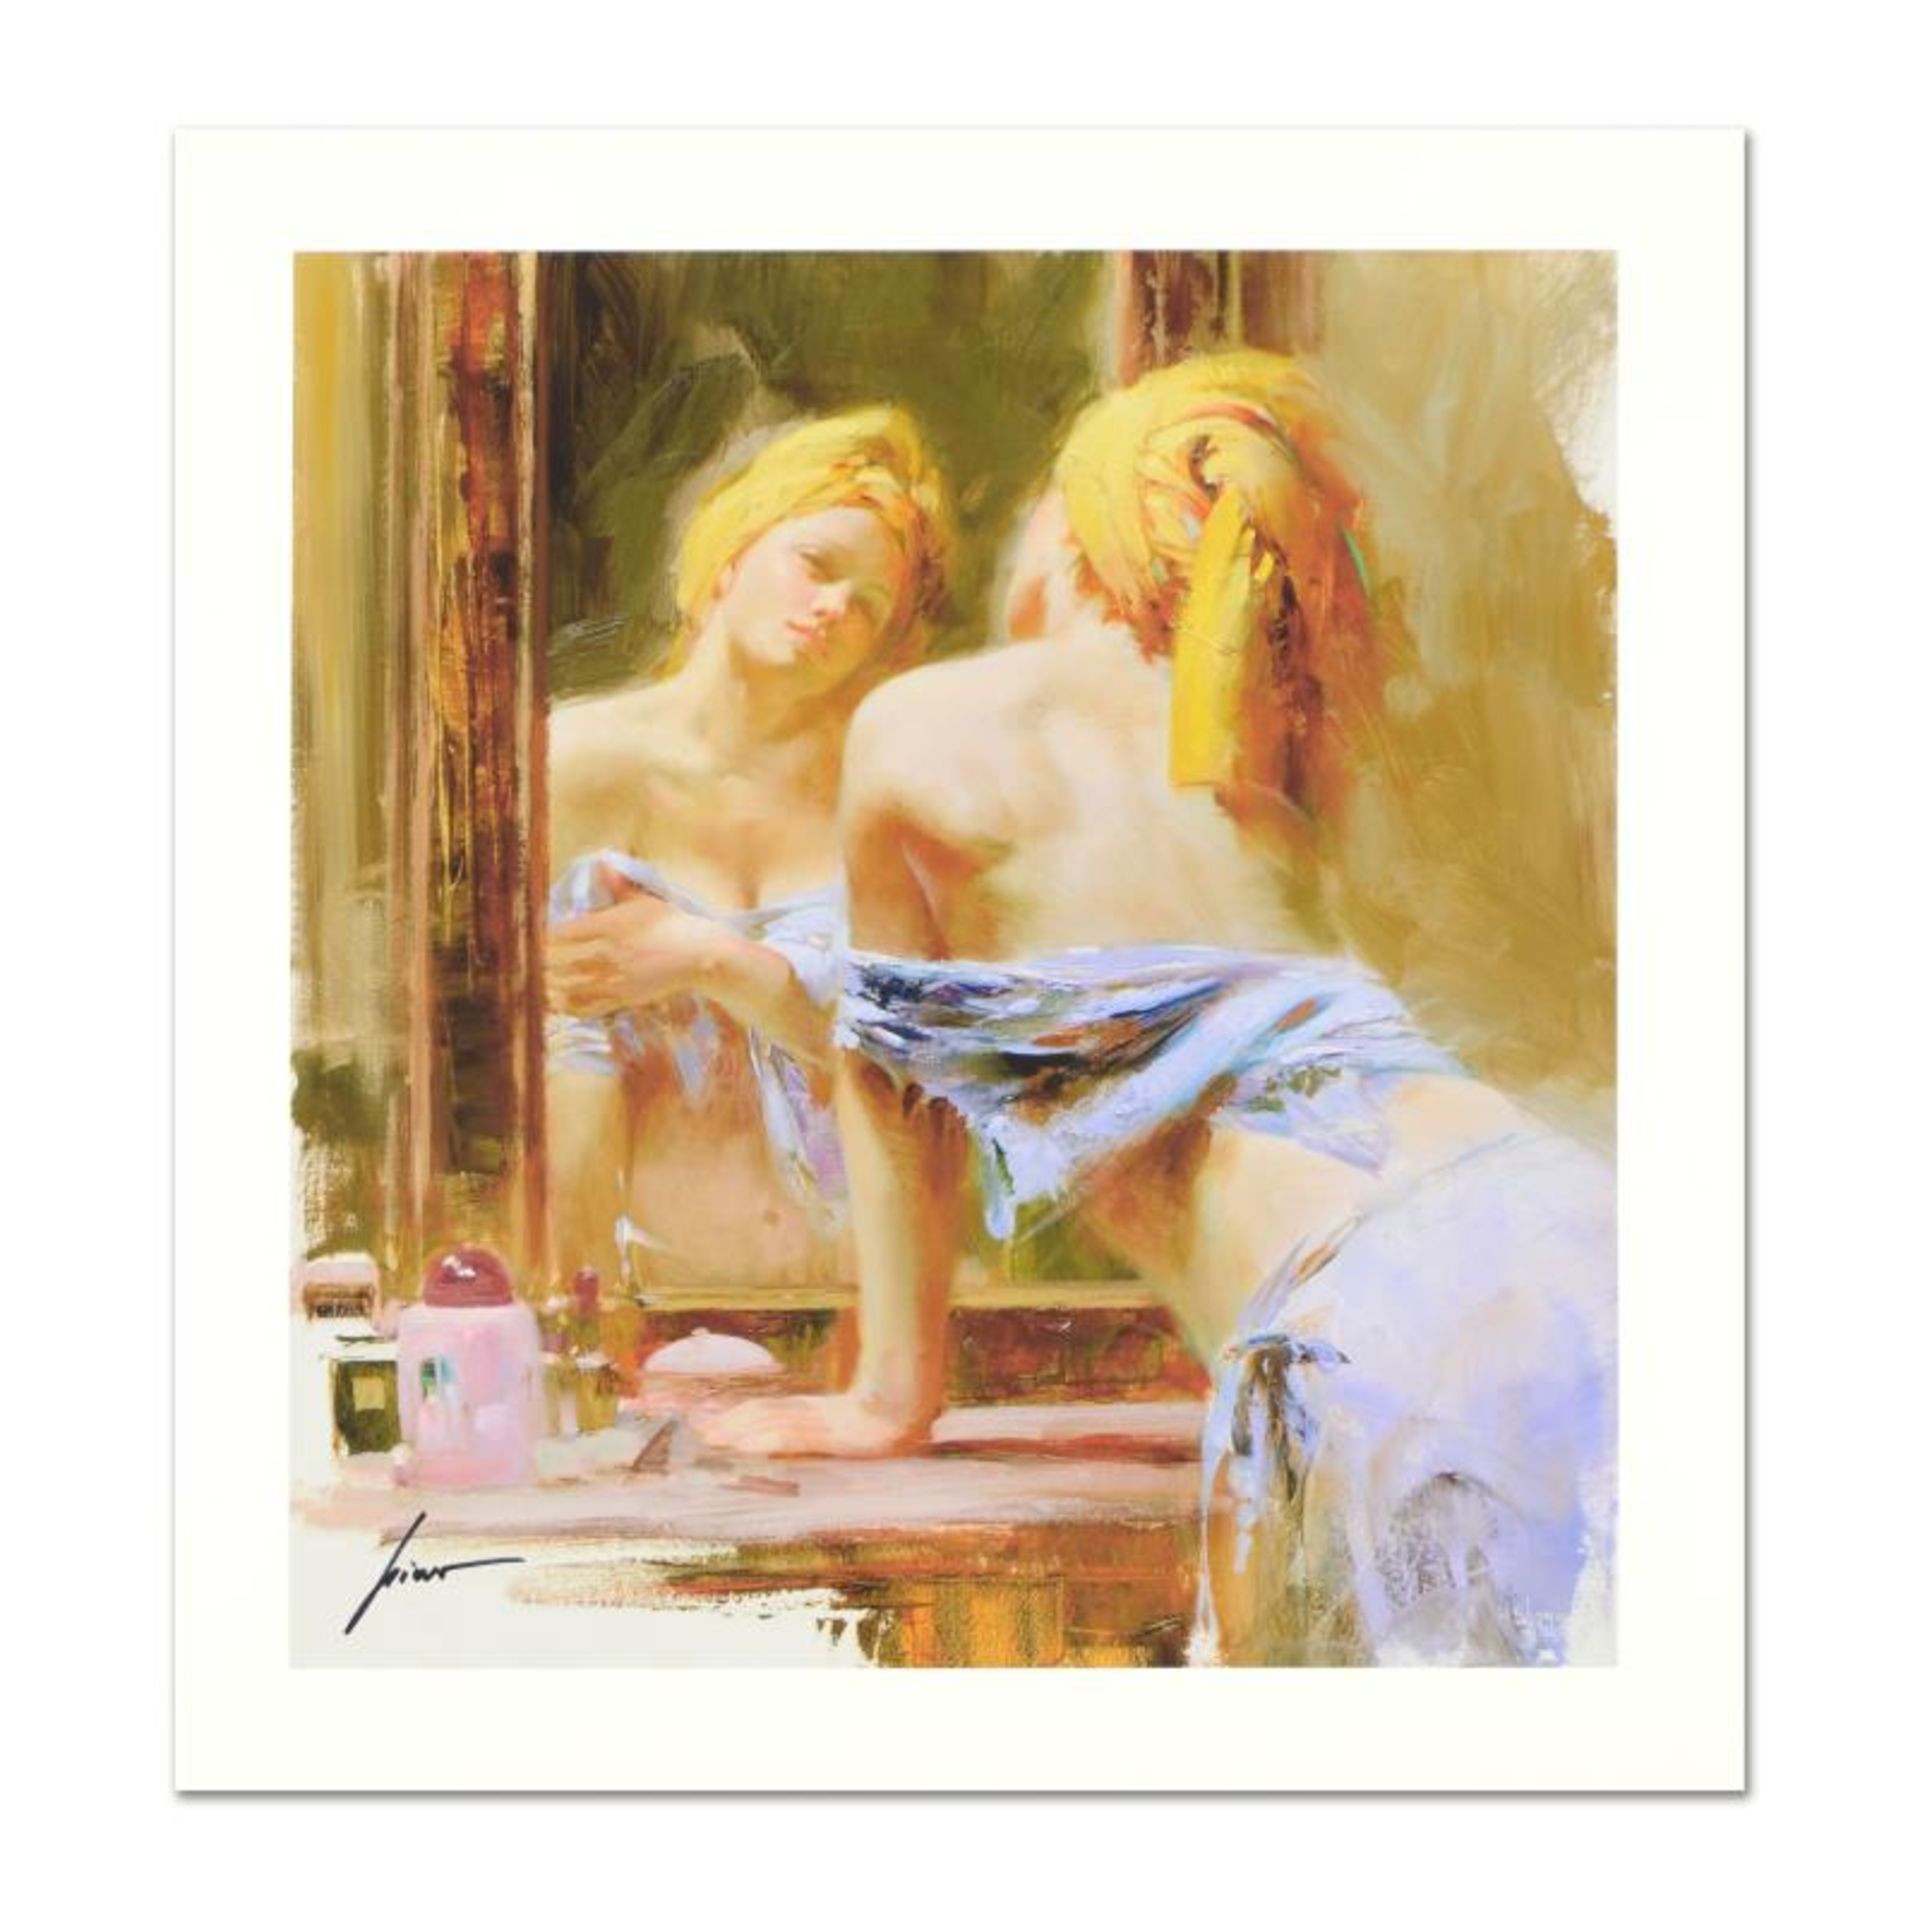 Pino (1939-2010) "Morning Reflections" Limited Edition Giclee. Numbered and Hand